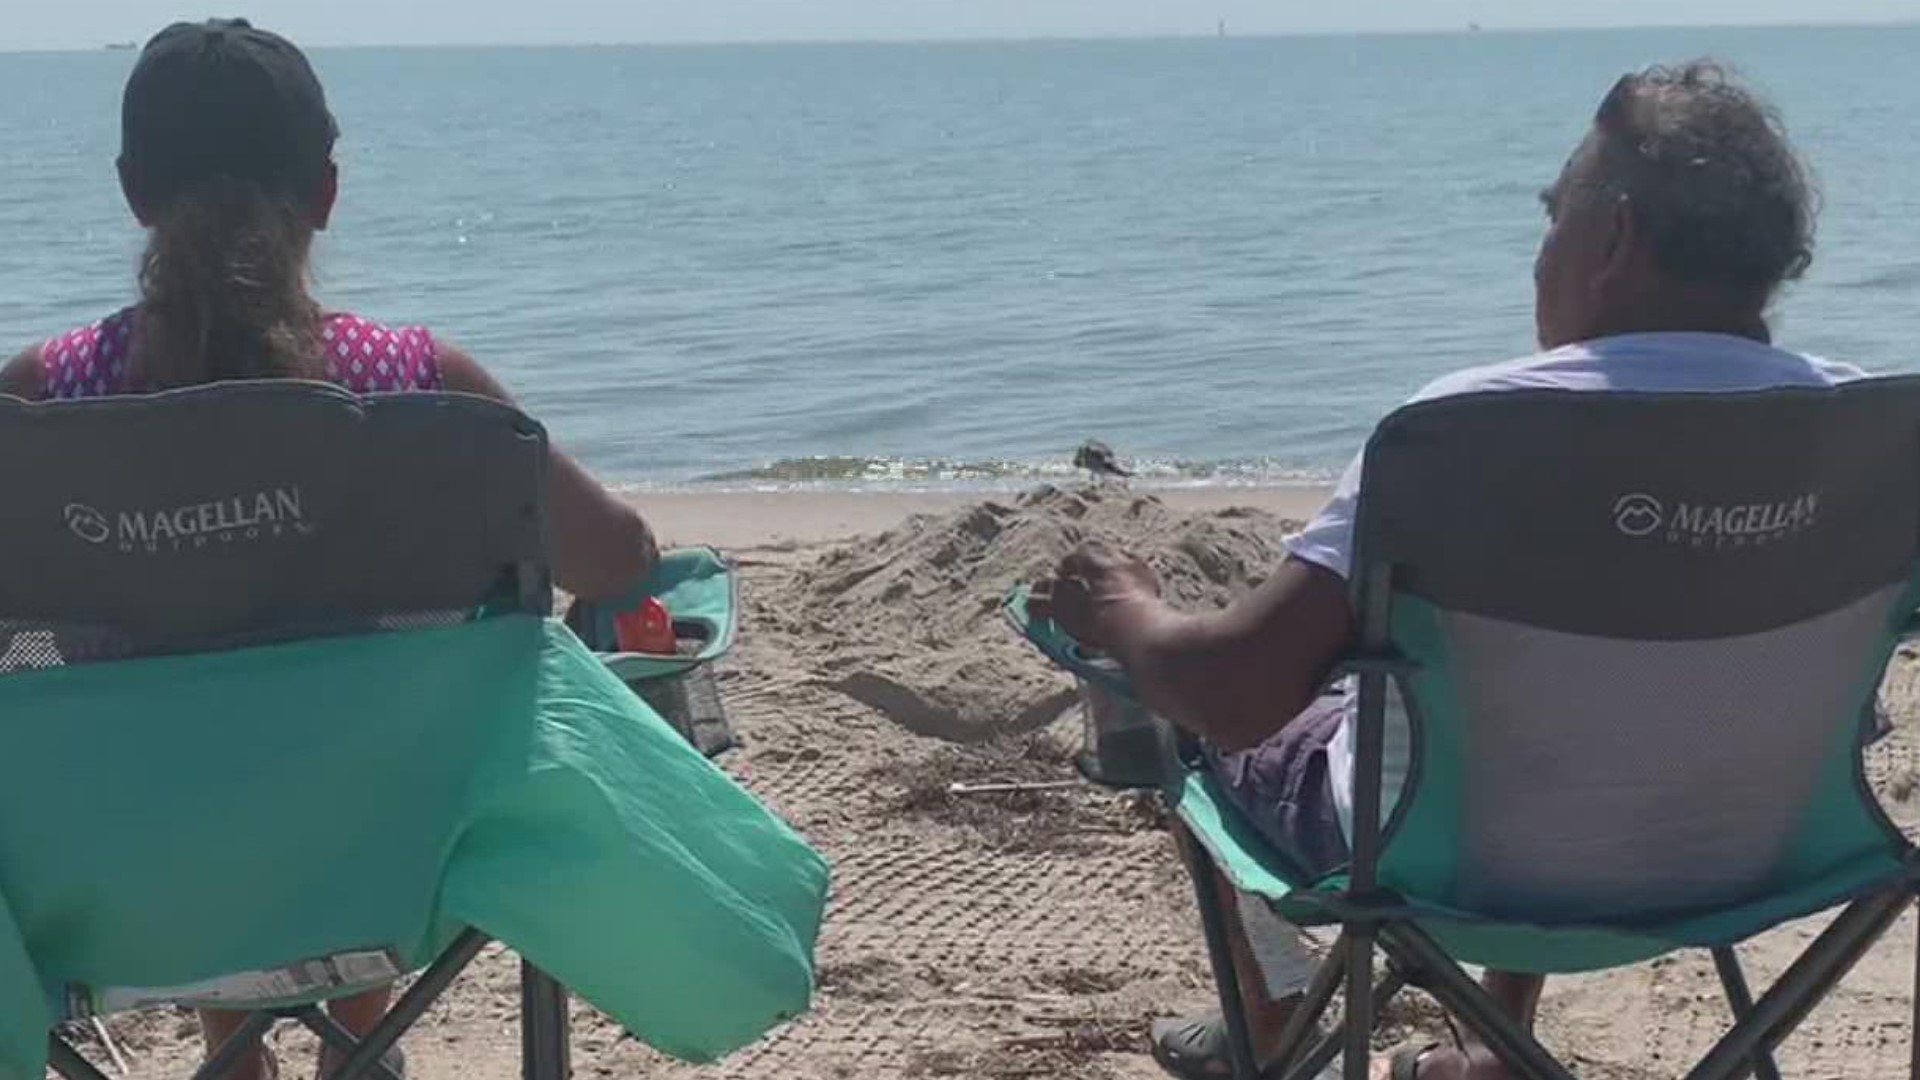 The City of Corpus Christi is working on plans to help fight erosion along our beaches and clear out the sand that's filling up the Packery Channel.